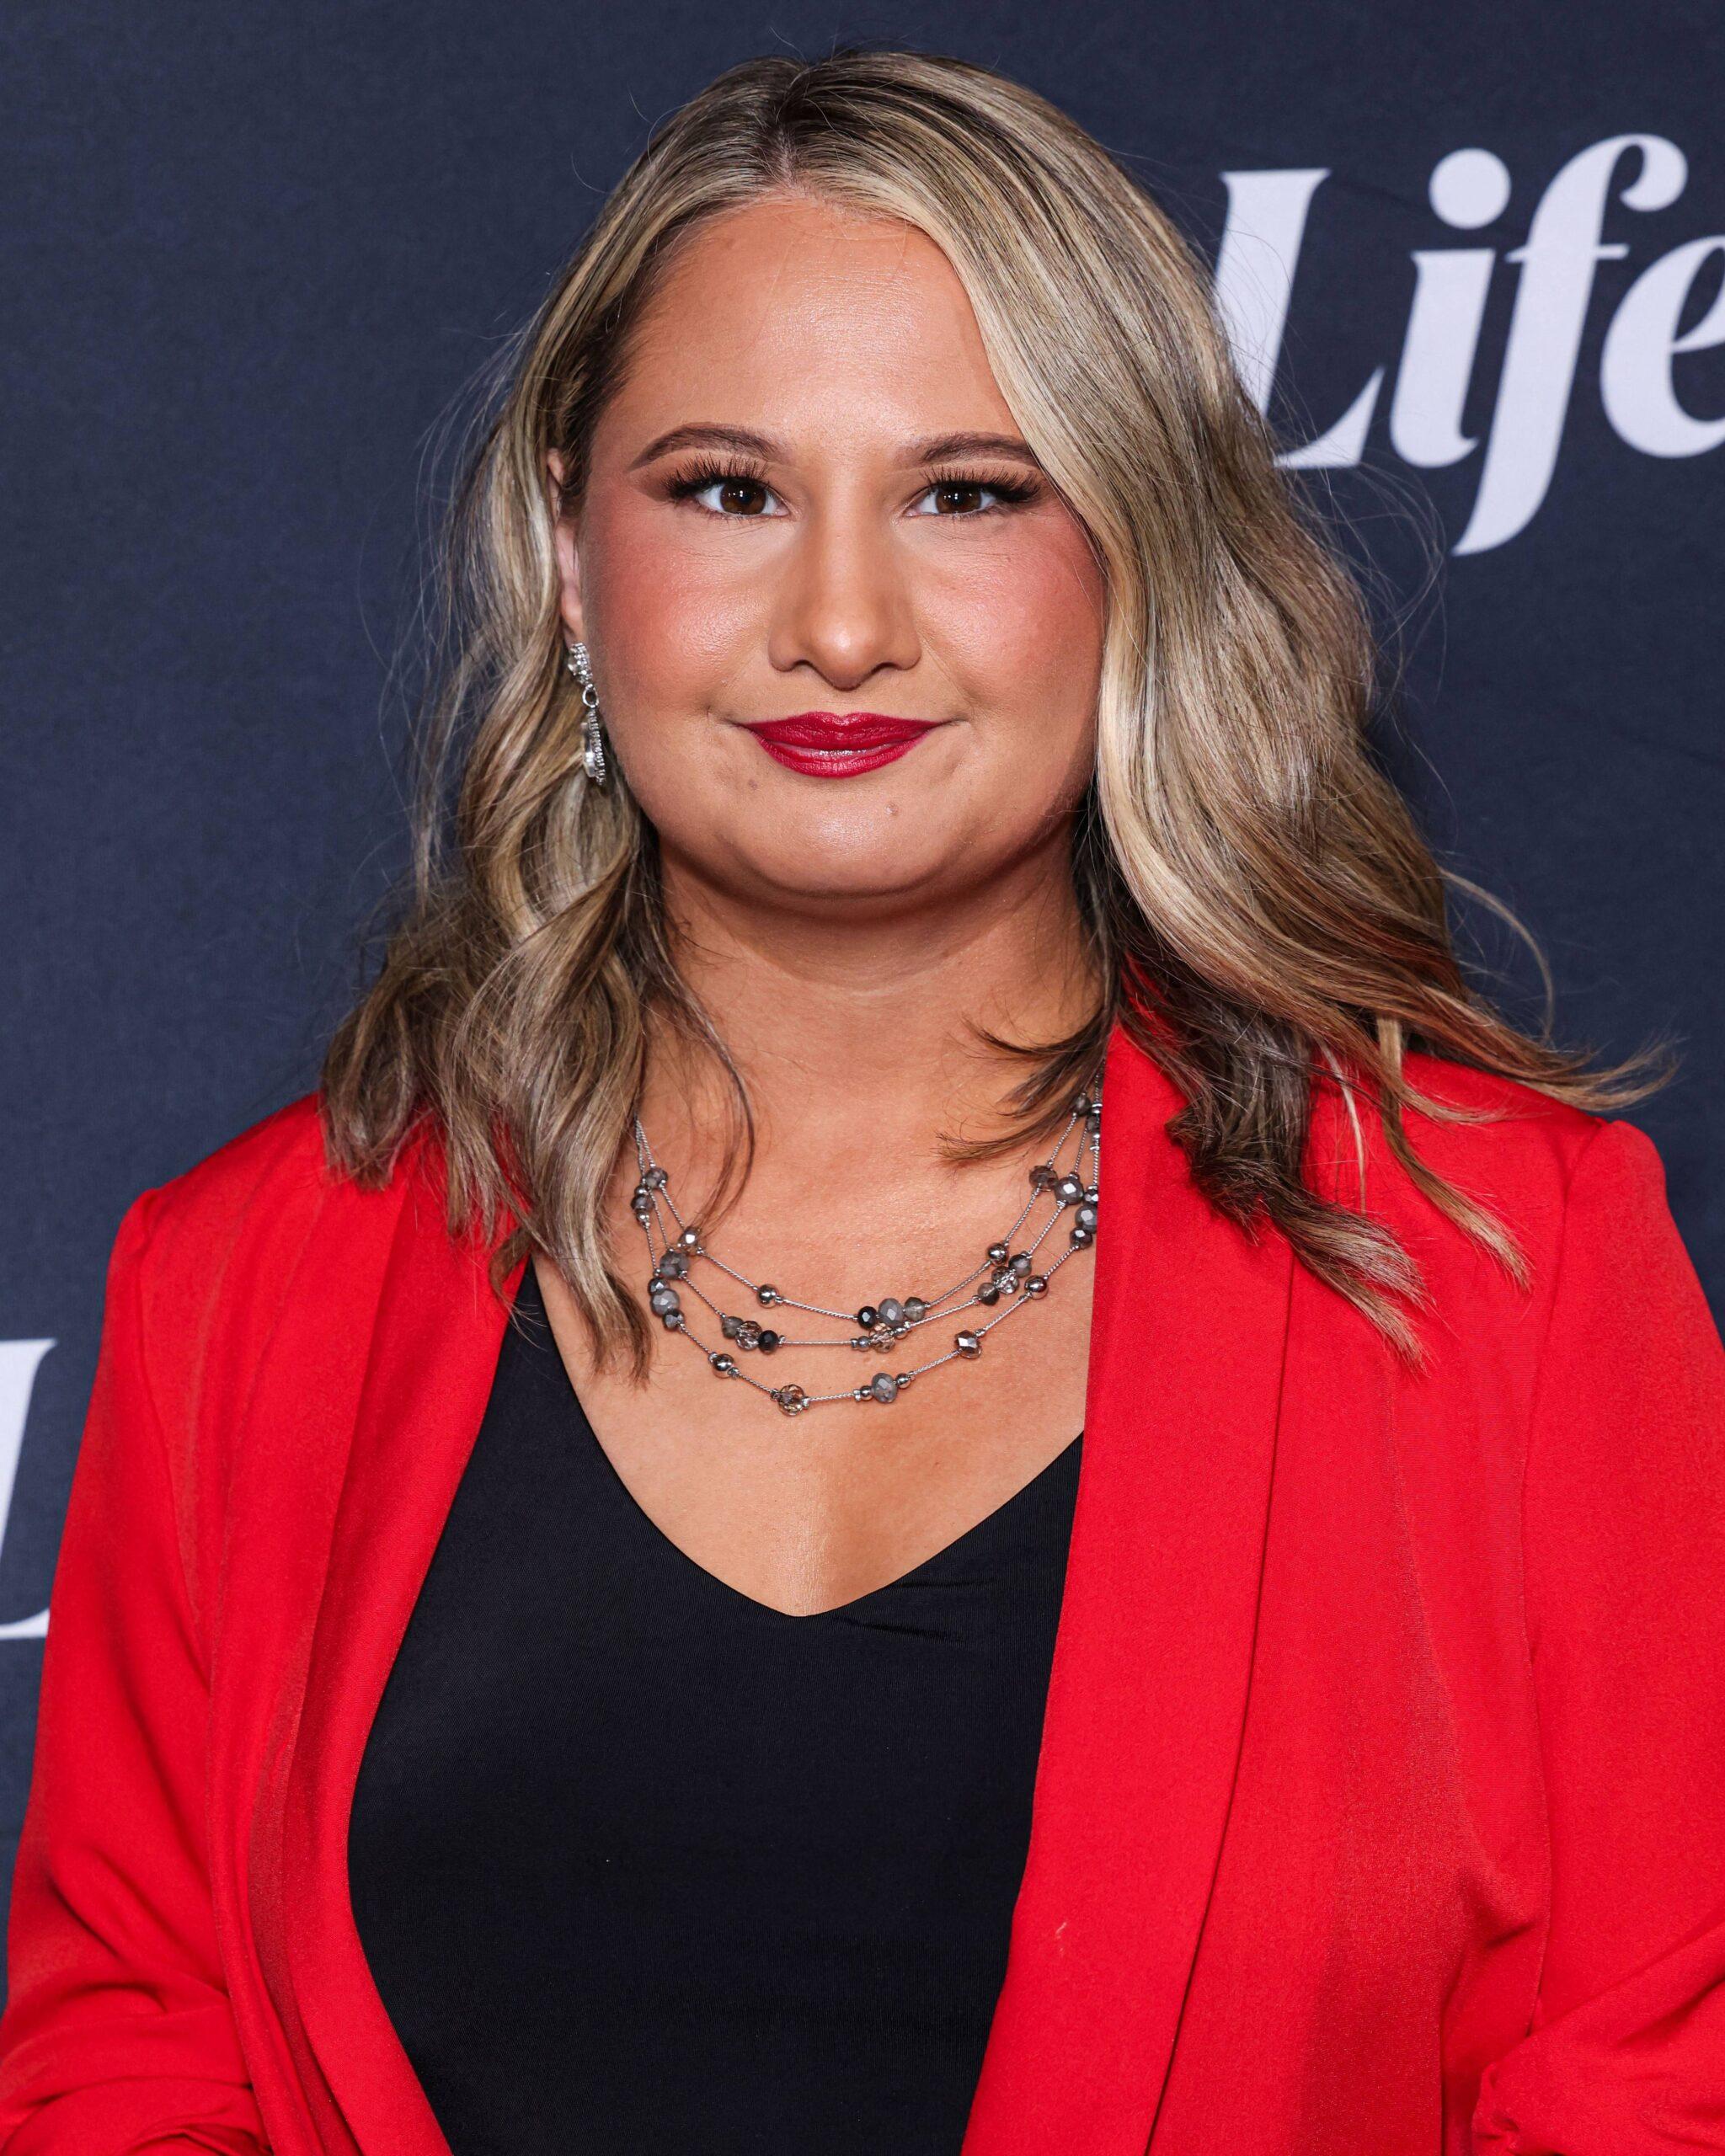 Gypsy Rose Blanchard in red blazer at An Evening With Lifetime: Conversations On Controversies FYC Event